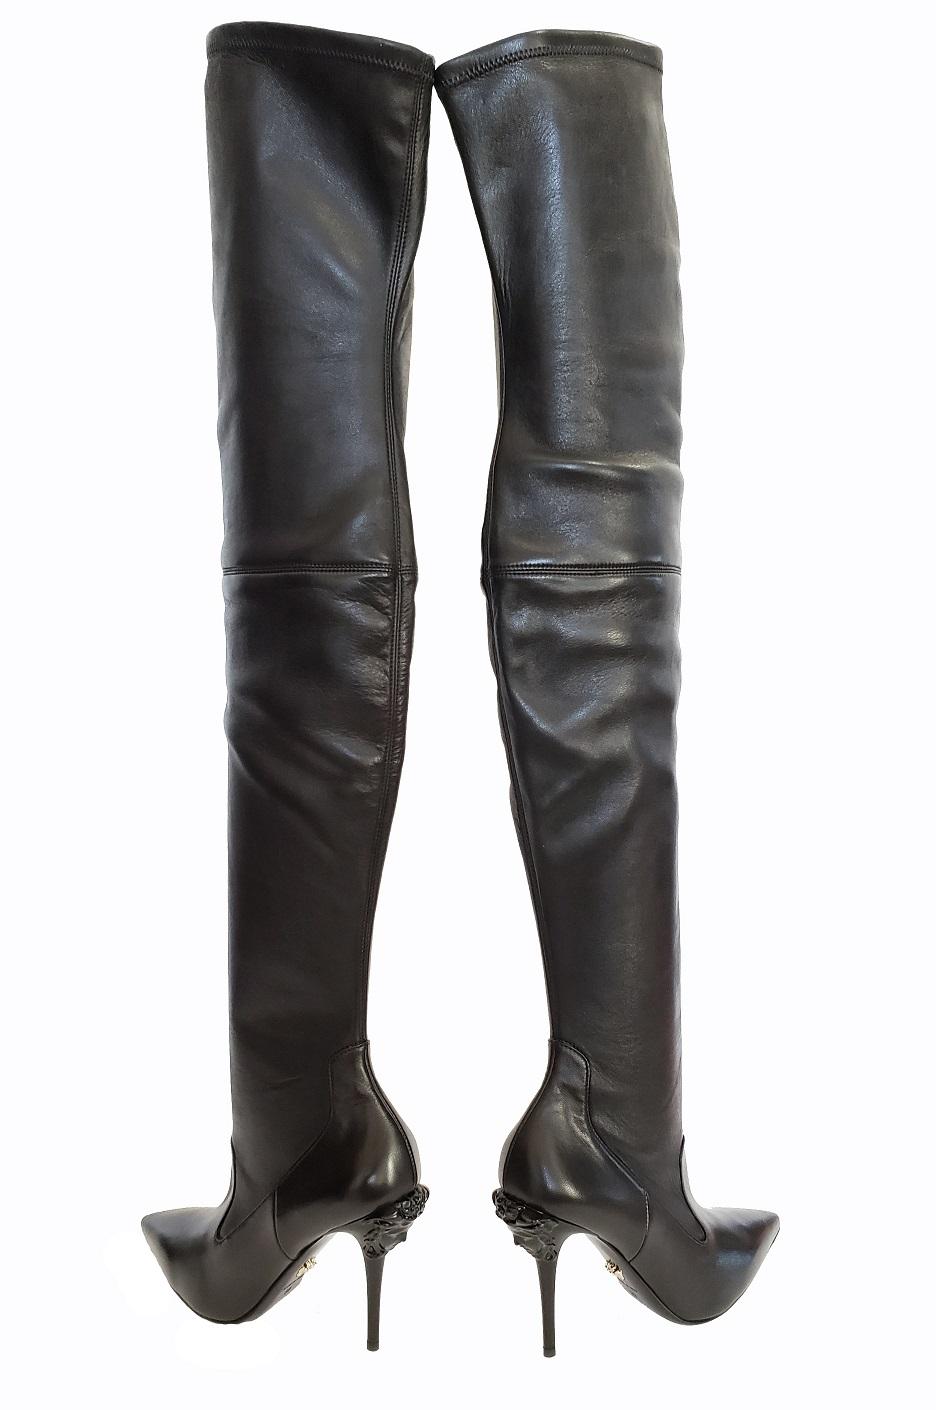 VERSACE 

Thigh High Boot With Medusa Heel

These stylish thigh boots exude style and confidence.

Stretch nappa leather upper

Shaft measures approx 25 inches in length

Approx 4 inch heel


Hidden side zip closure

Made in Italy

IT Size 39 - US